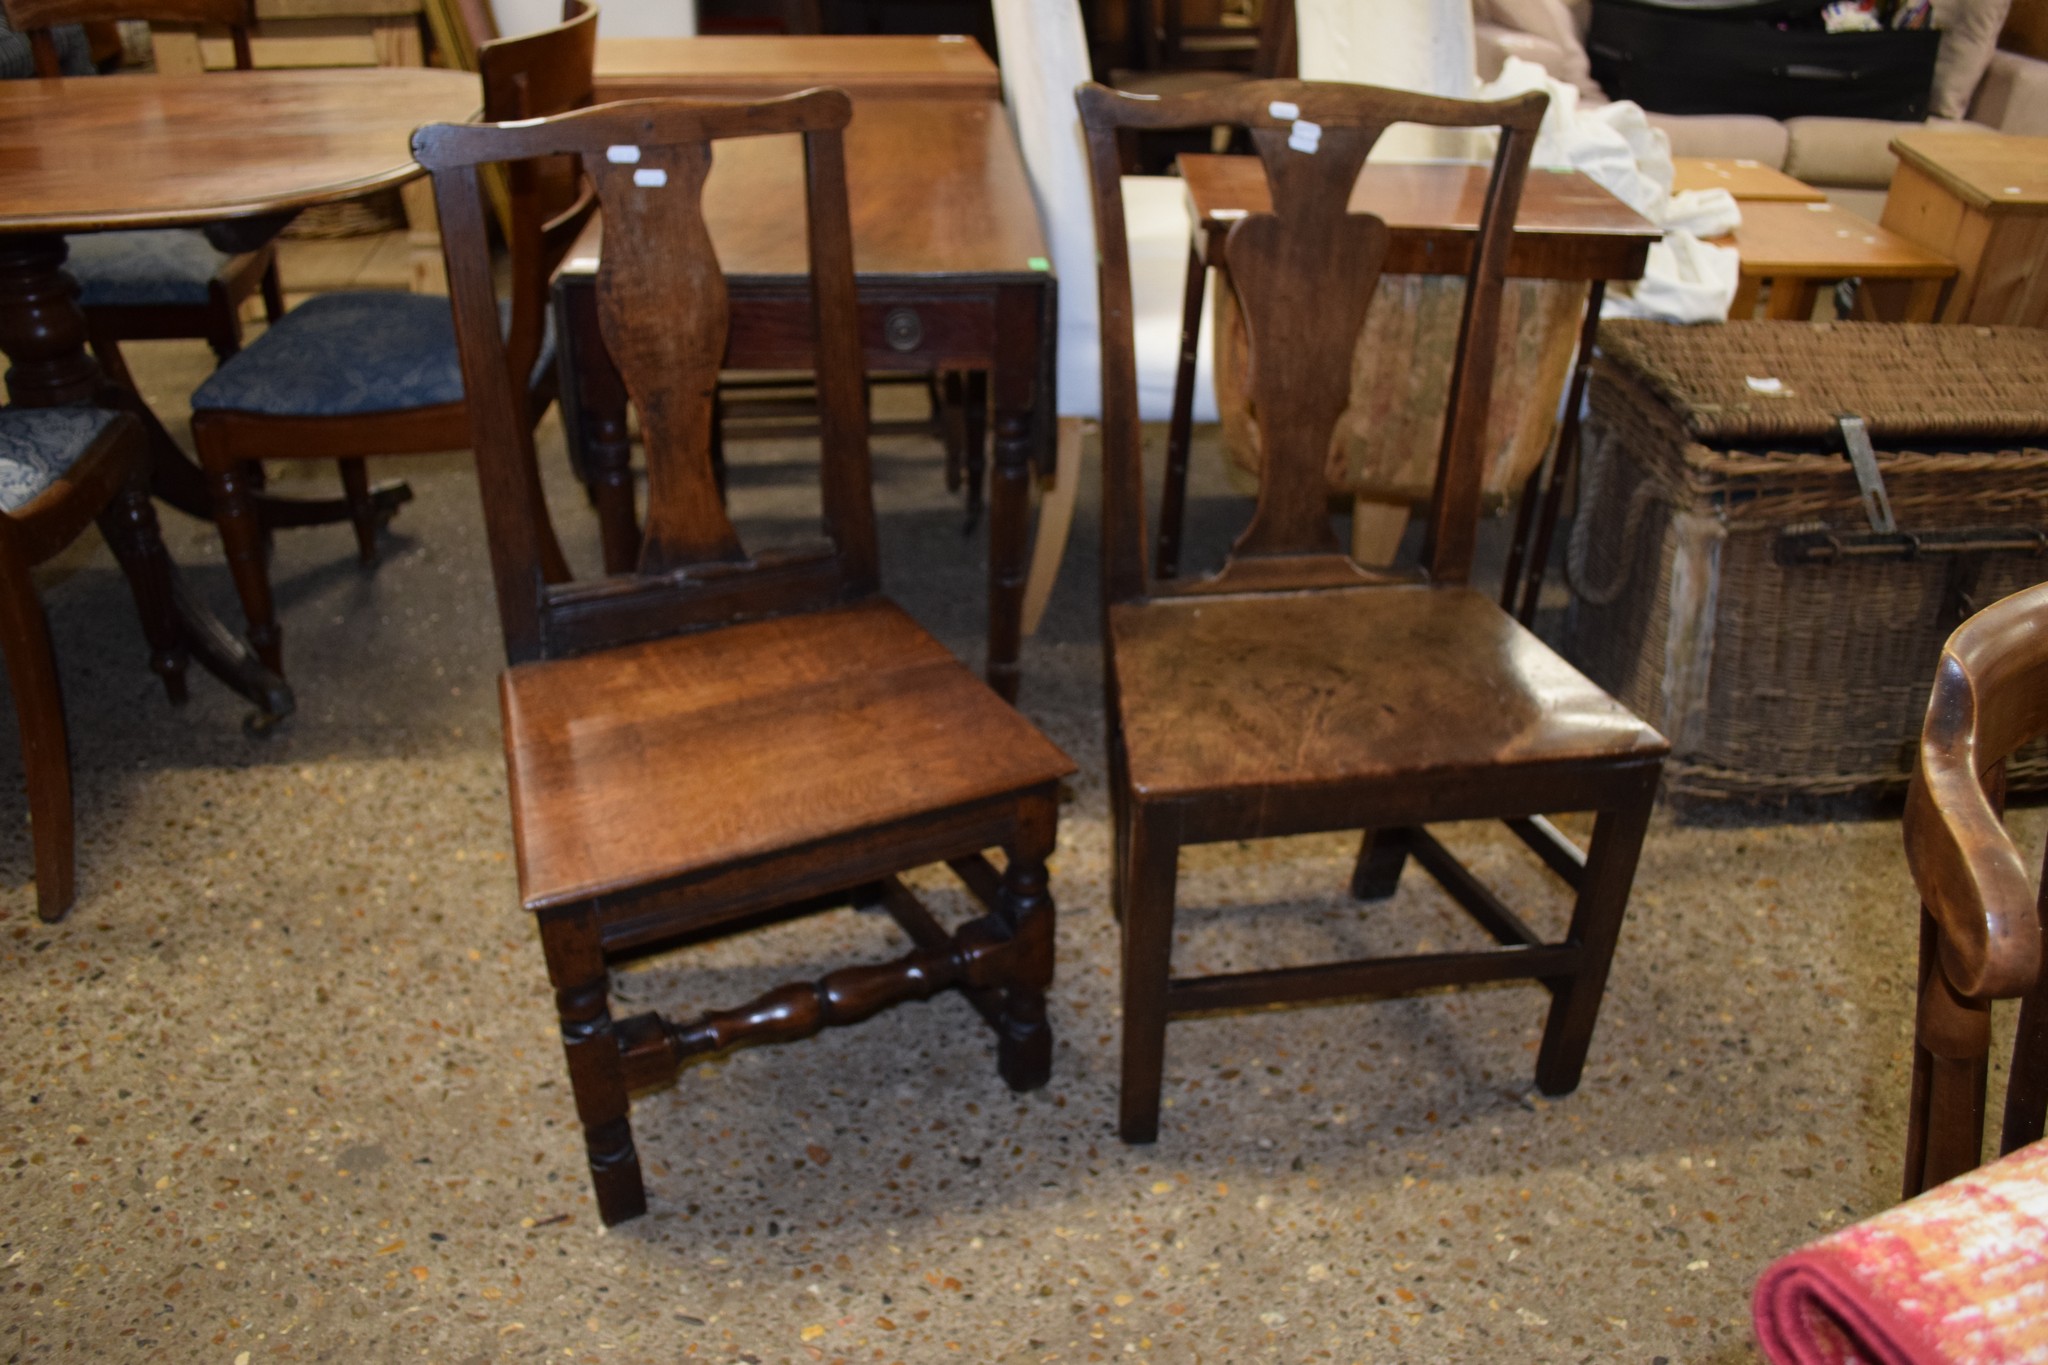 PAIR OF OAK SOLID SEAT DINING CHAIRS WITH SPLAT BACKS, CIRCA LATE 18TH CENTURY